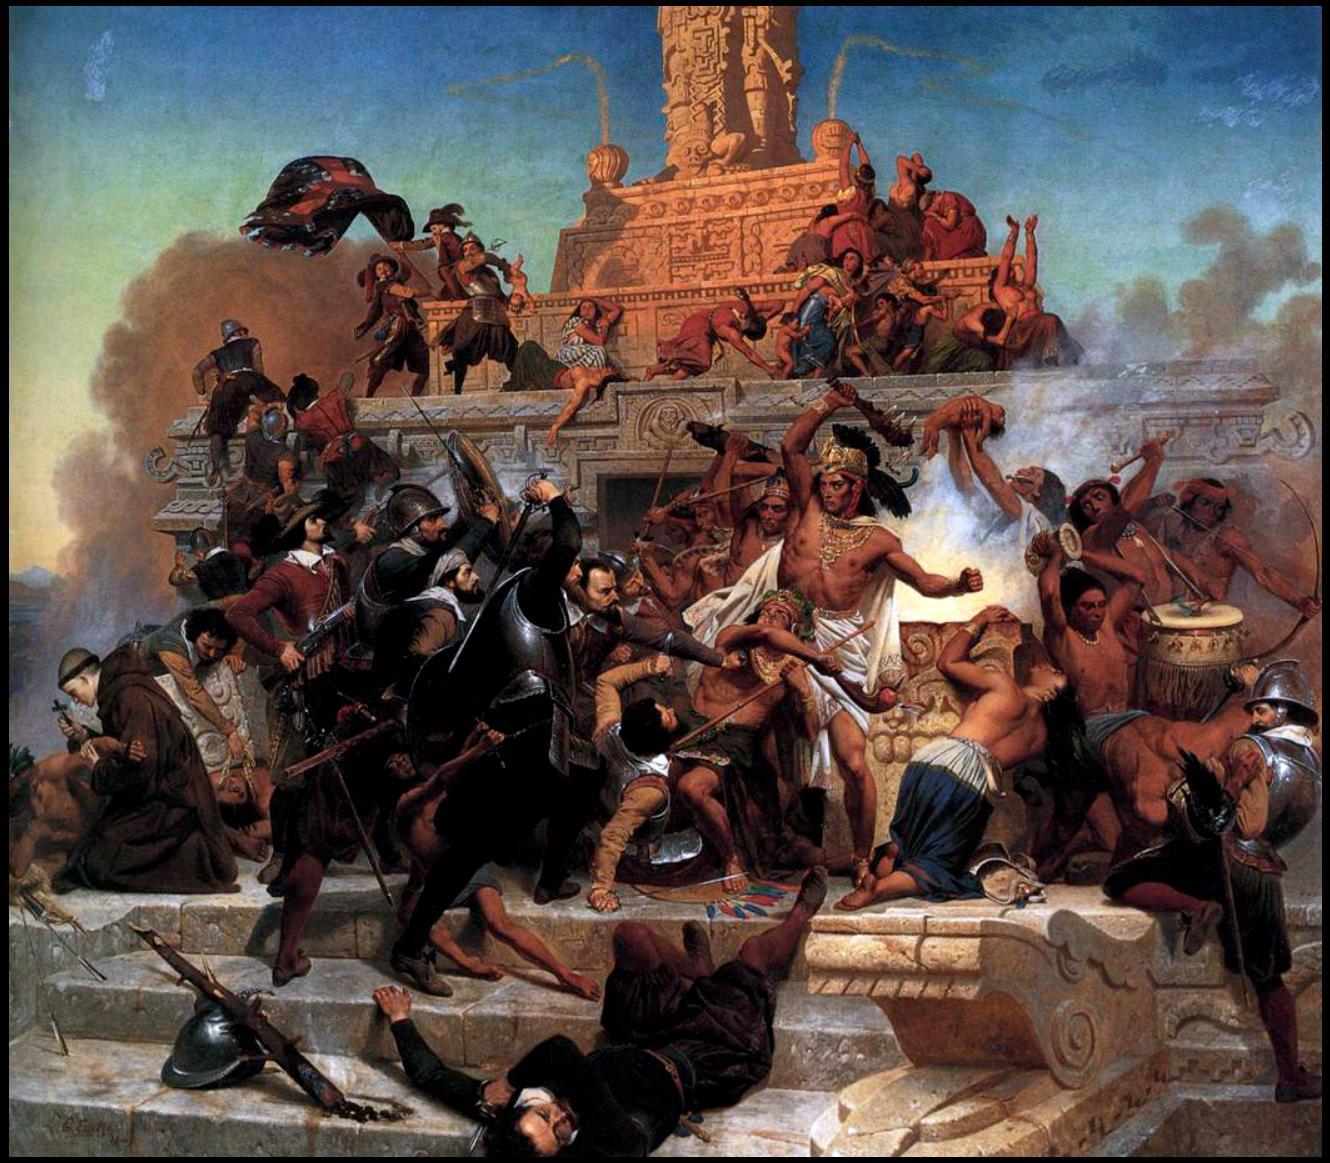 Storming of Teocalli by Cortez and Troops, Emanuel Leutze